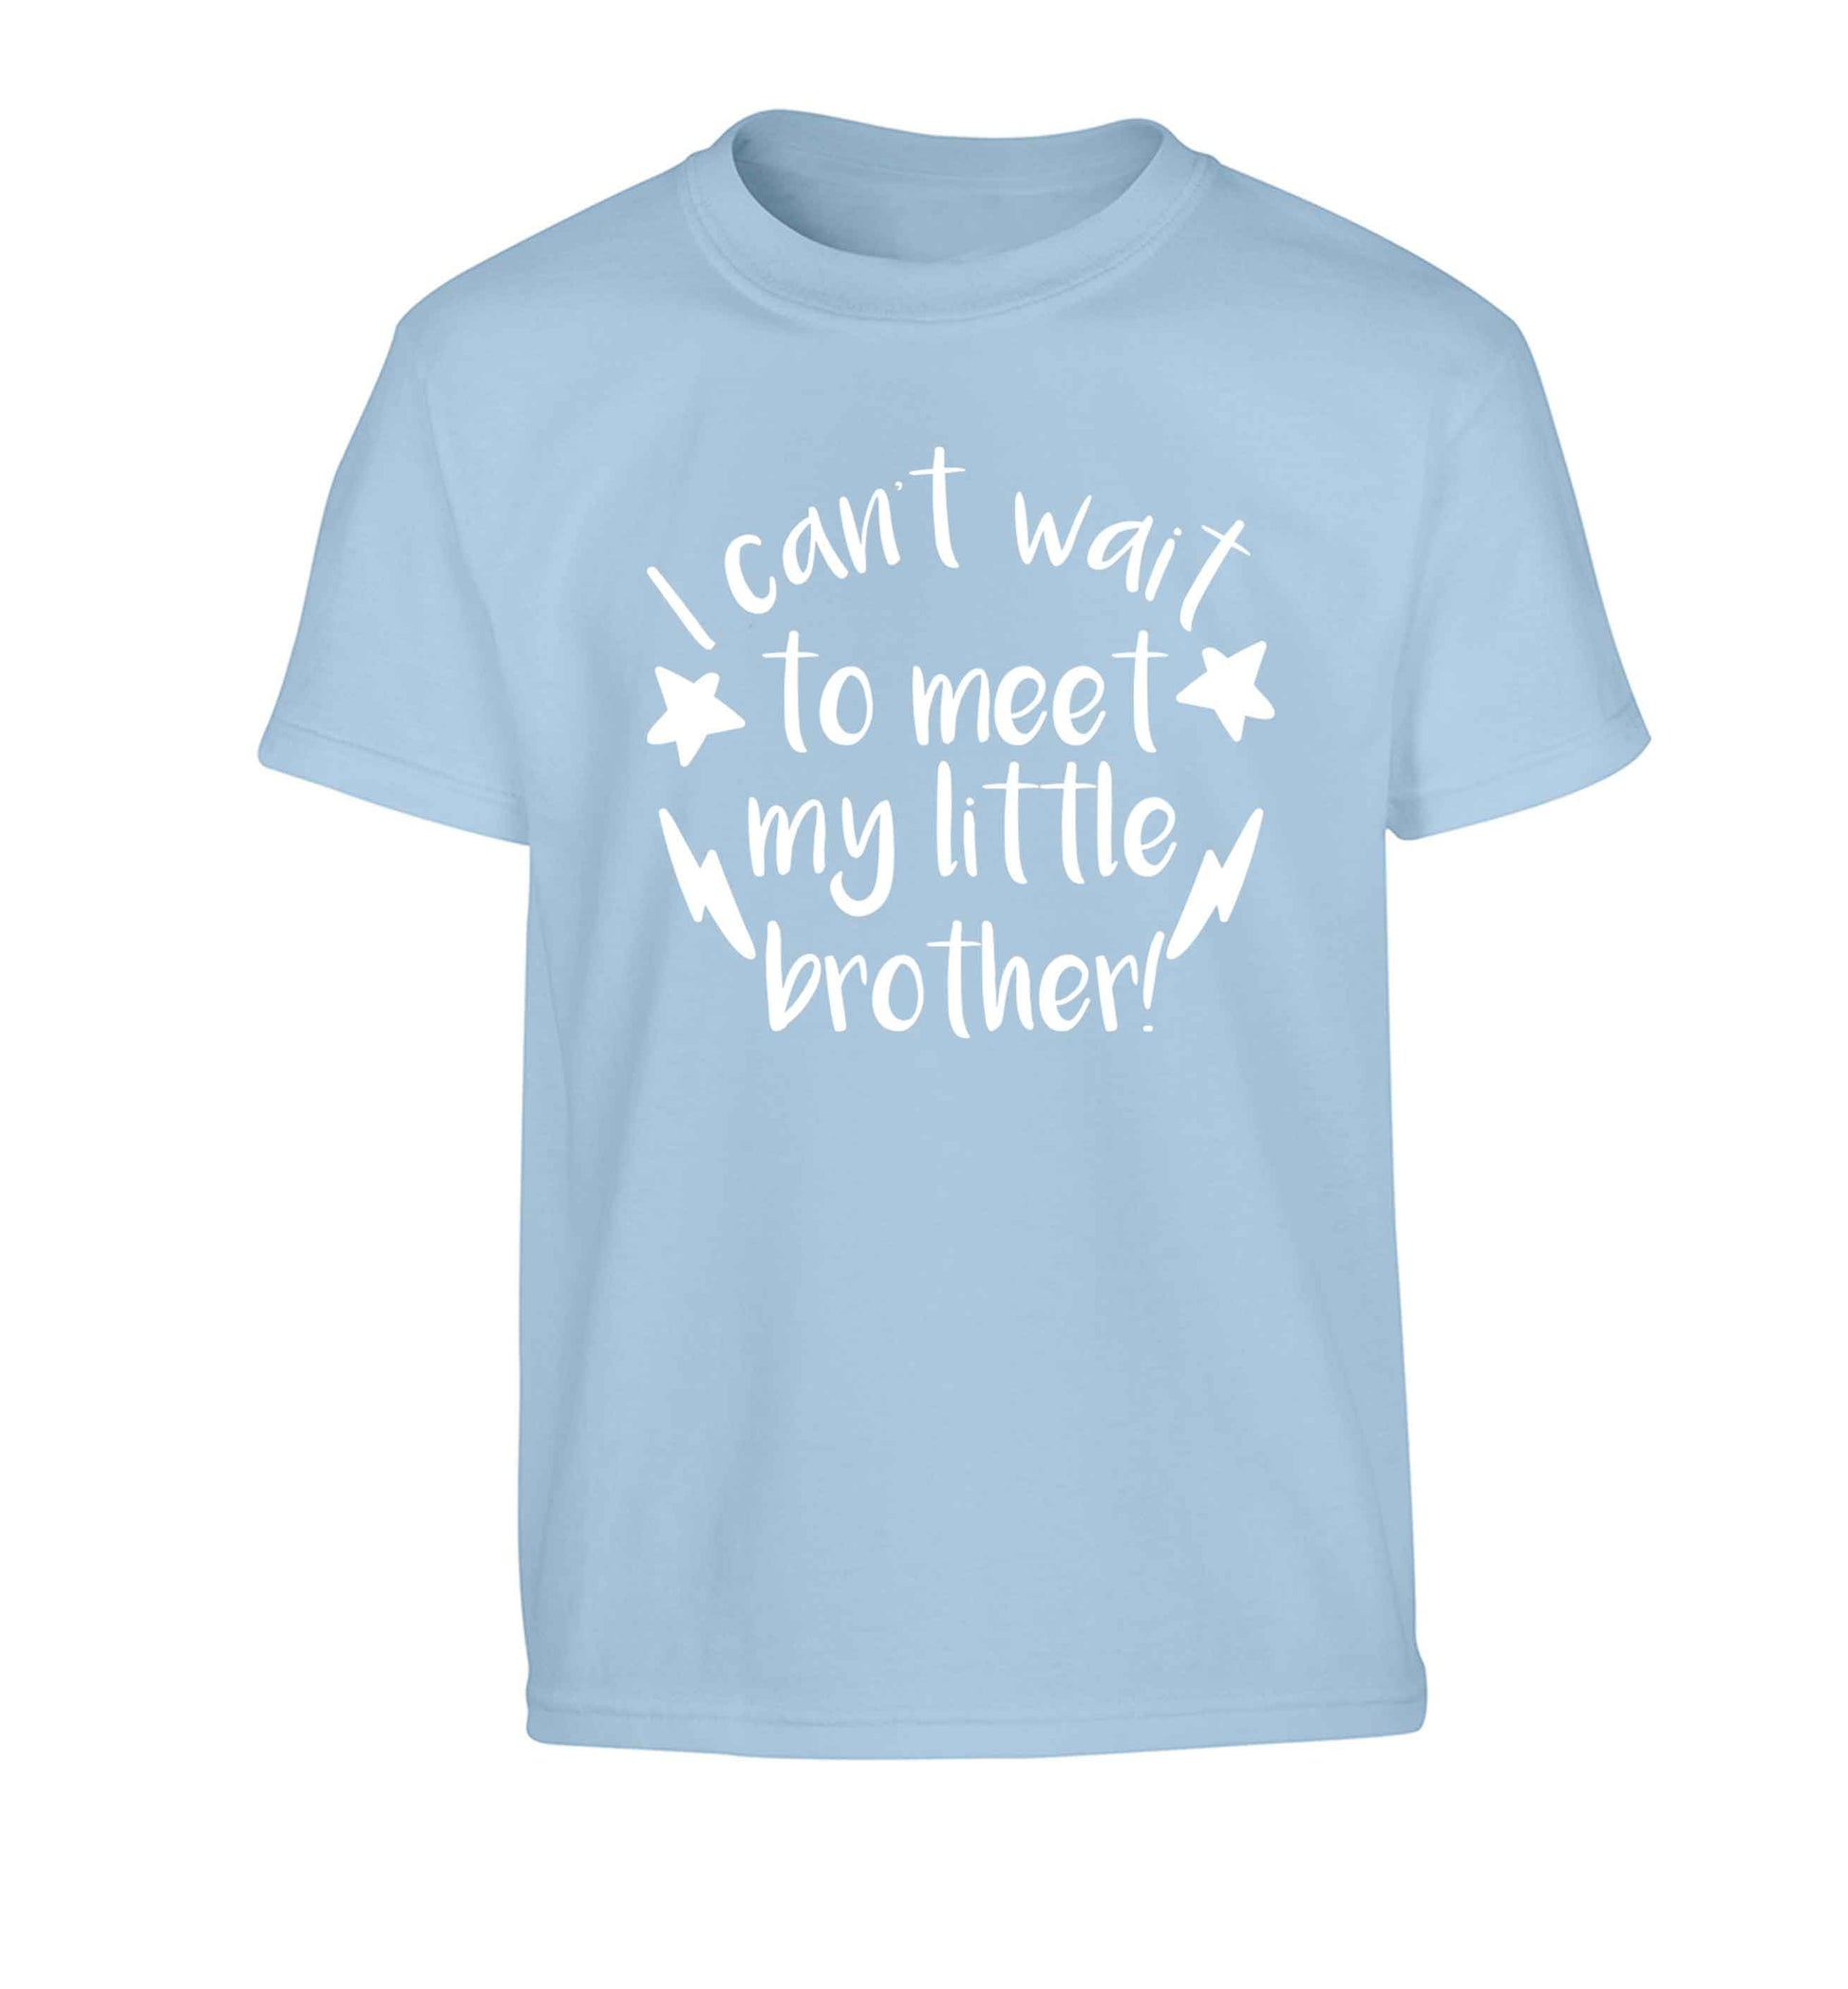 I can't wait to meet my sister! Children's light blue Tshirt 12-13 Years